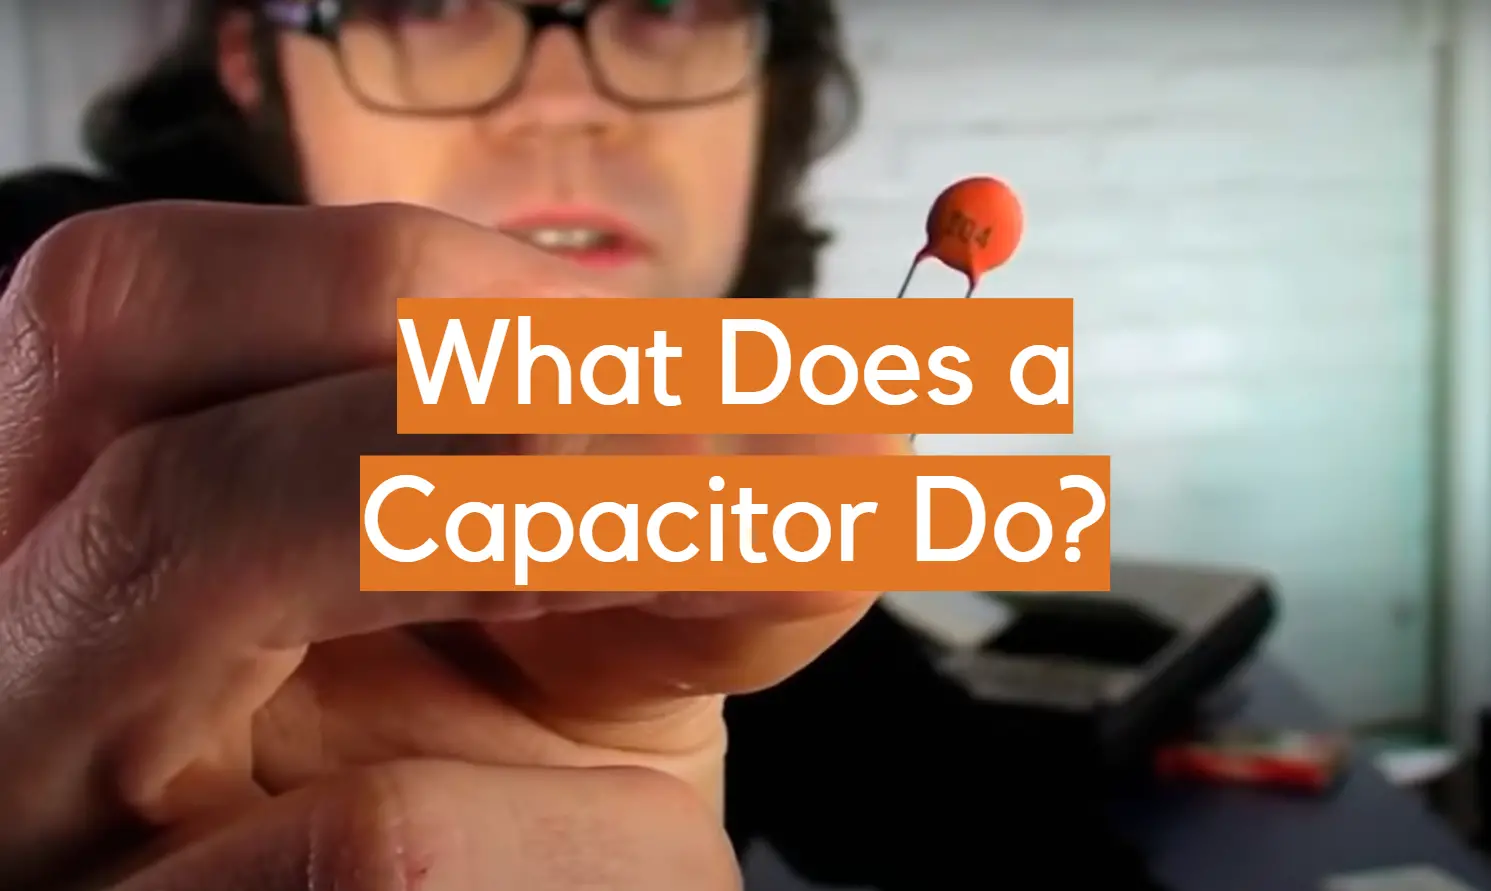 What Does a Capacitor Do?